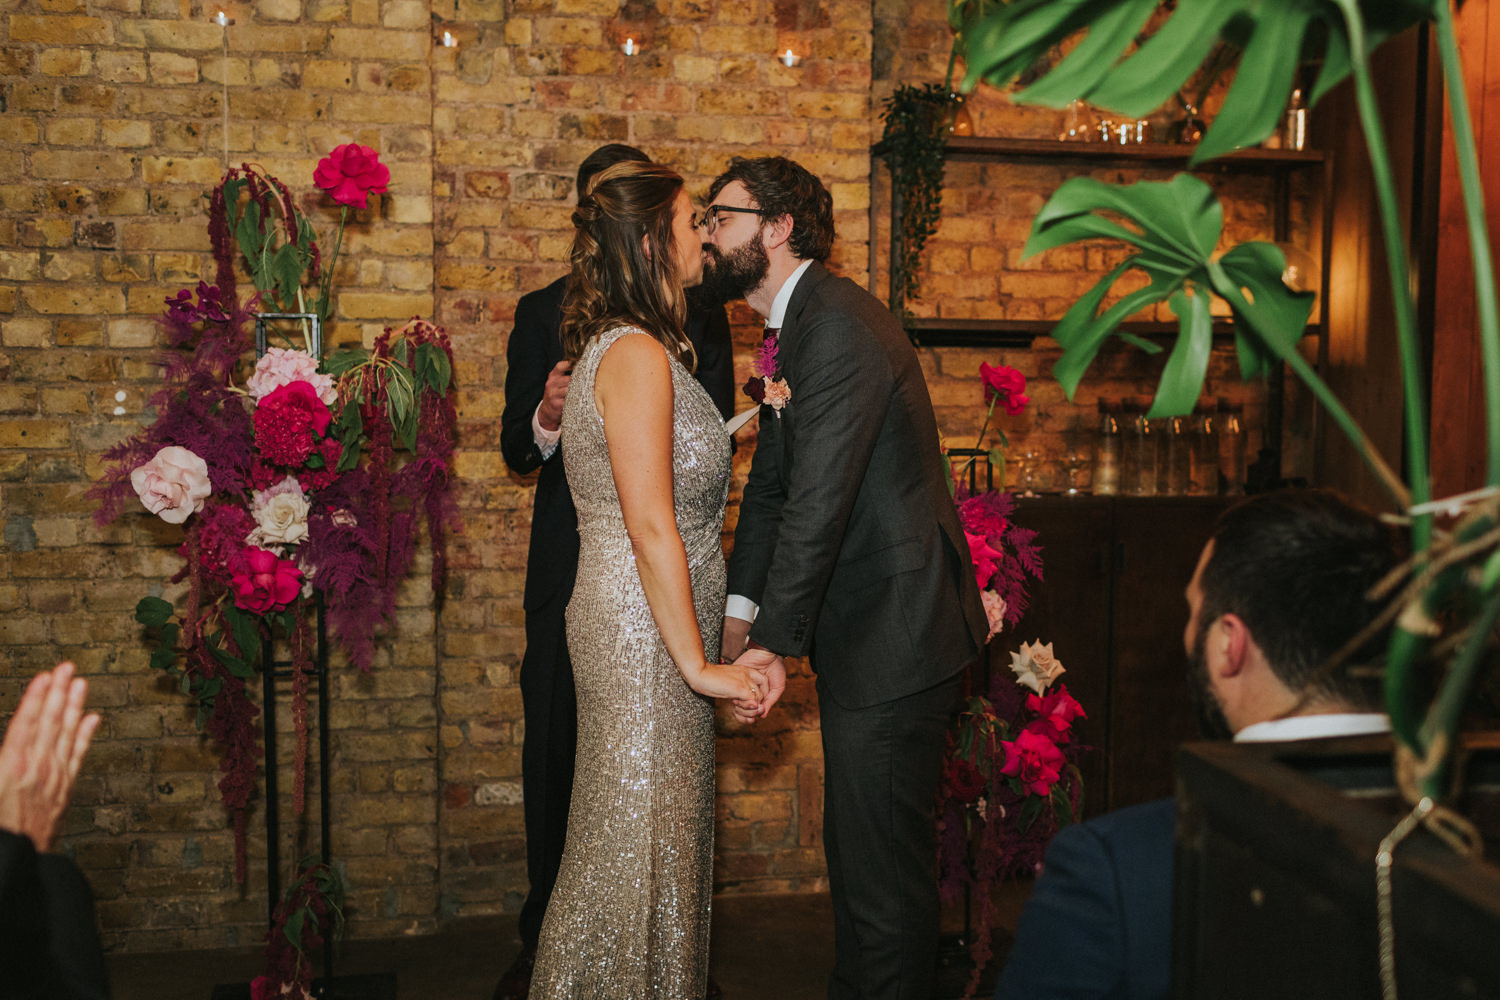 First Kiss at wedding ceremony at Hackney Coffee Company in London.